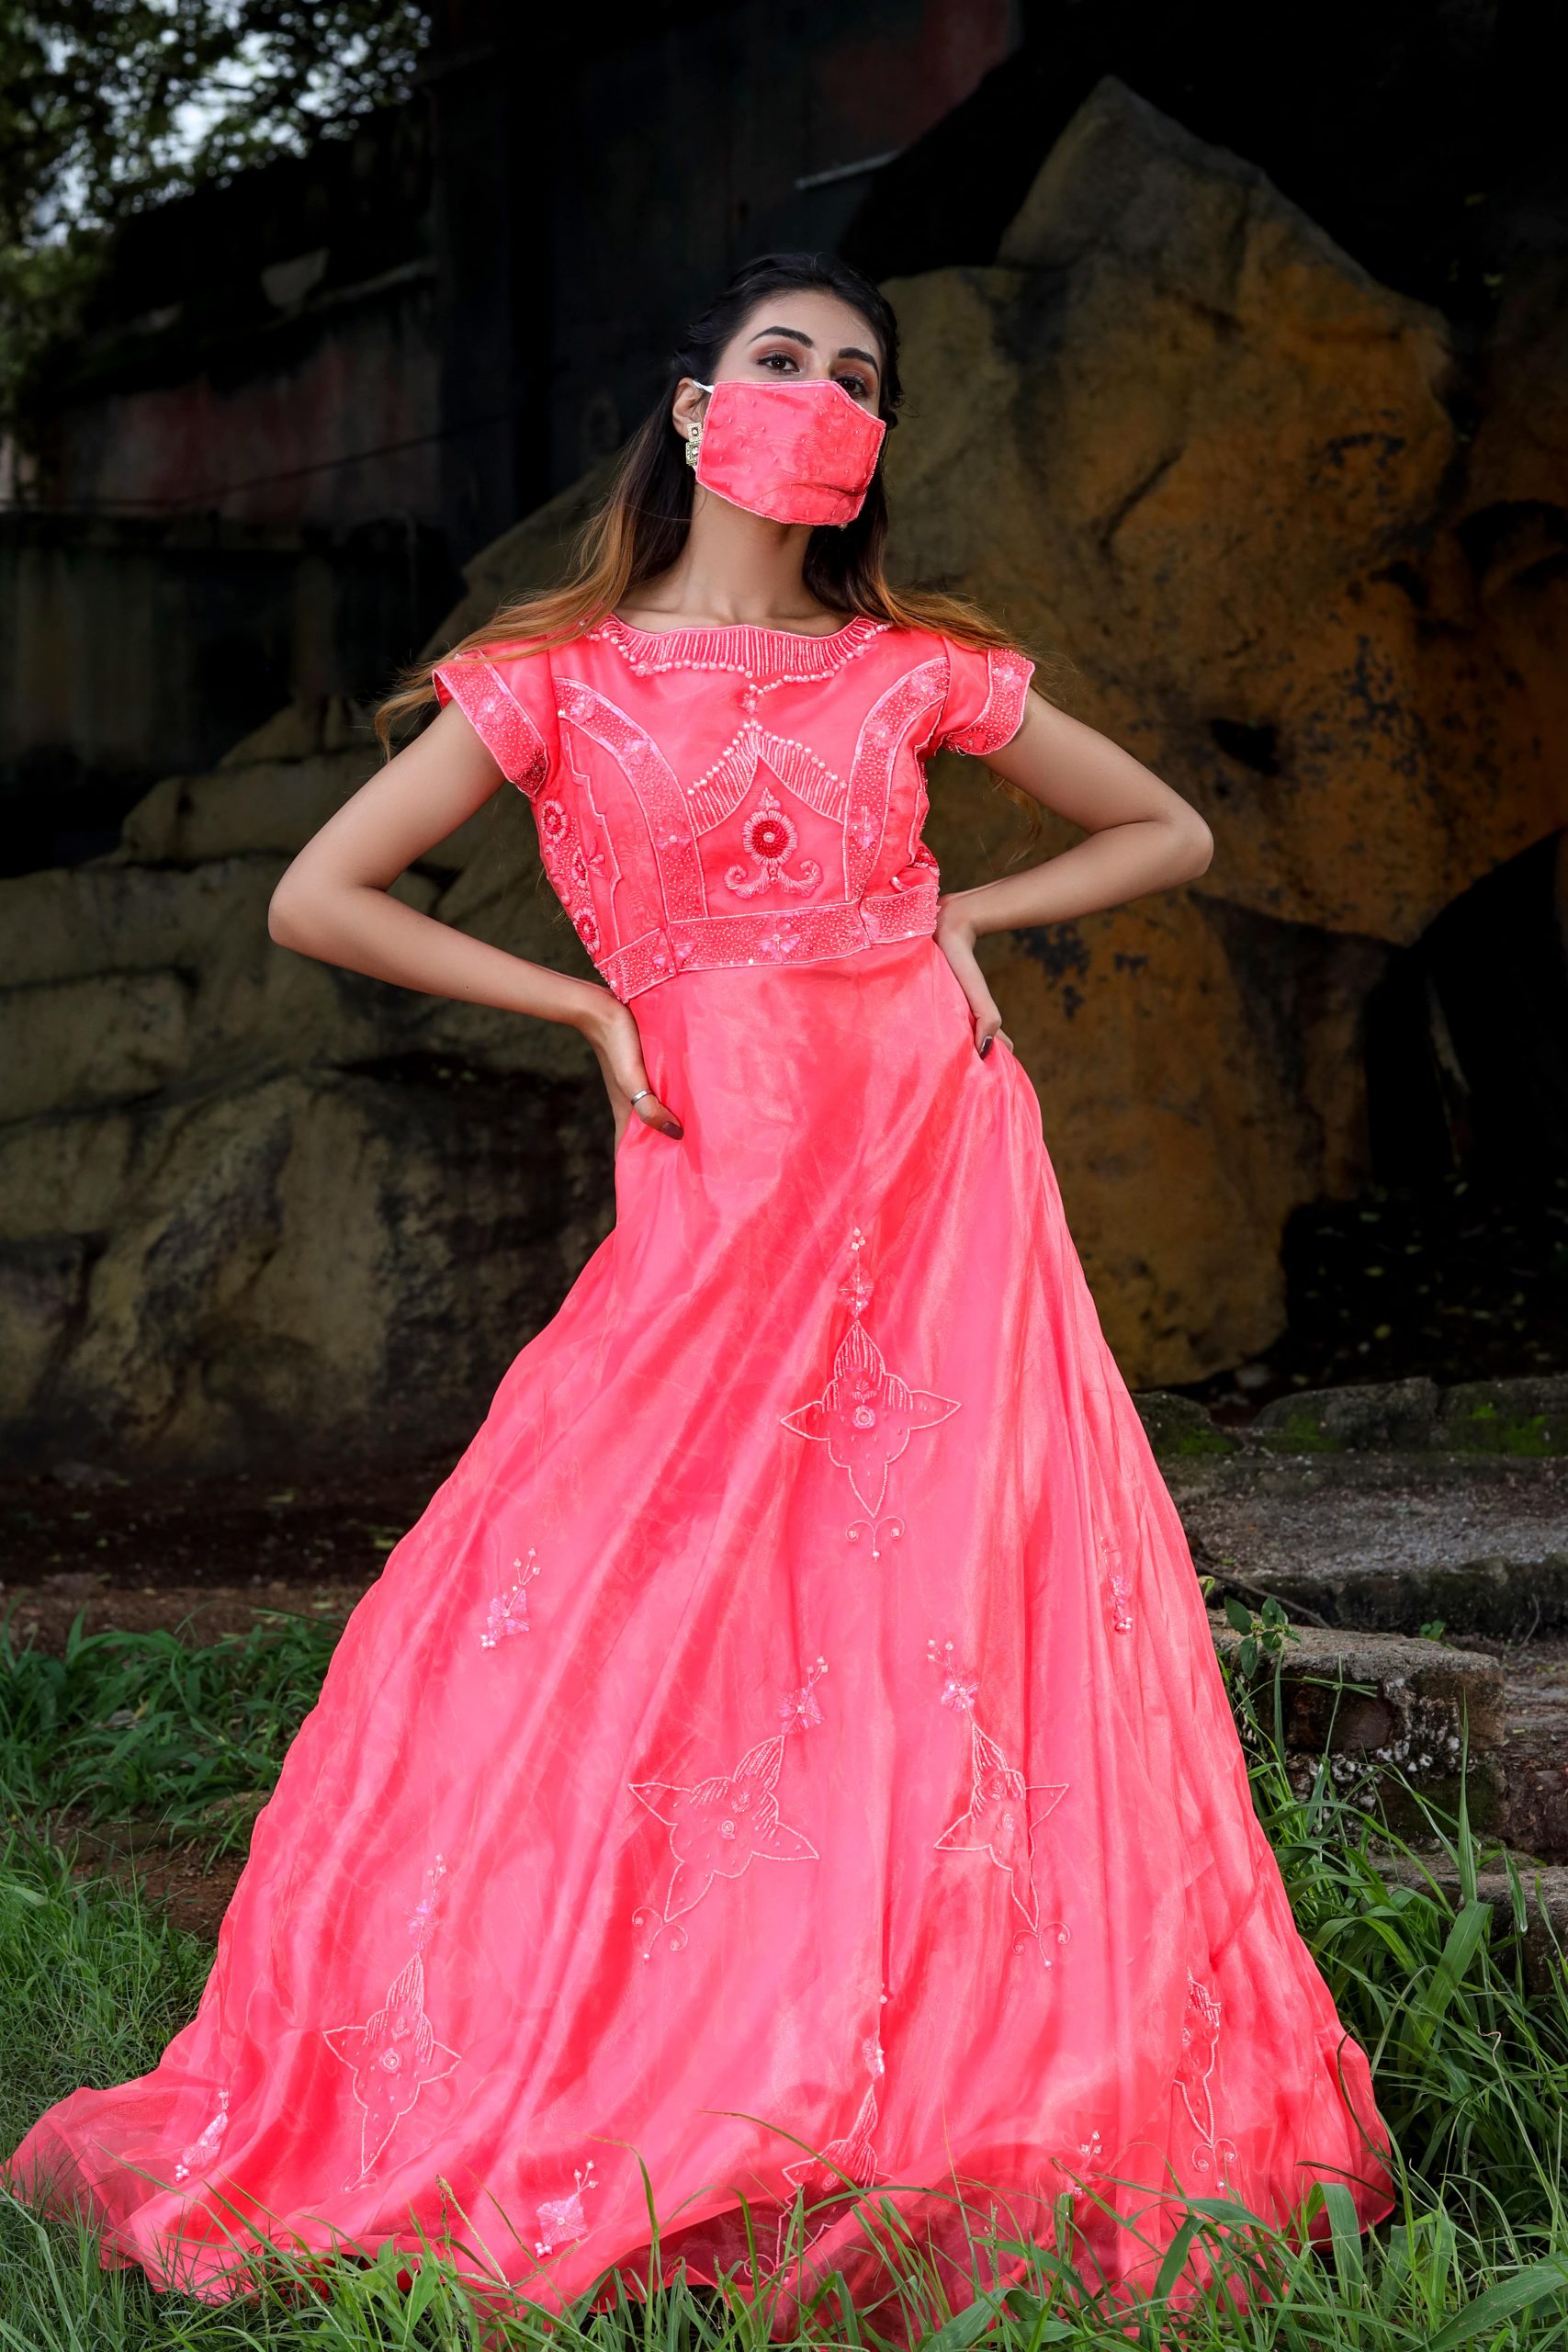 AG1802 - 40 / dark pink | Exquisite gowns, Dresses near me, Usa dresses